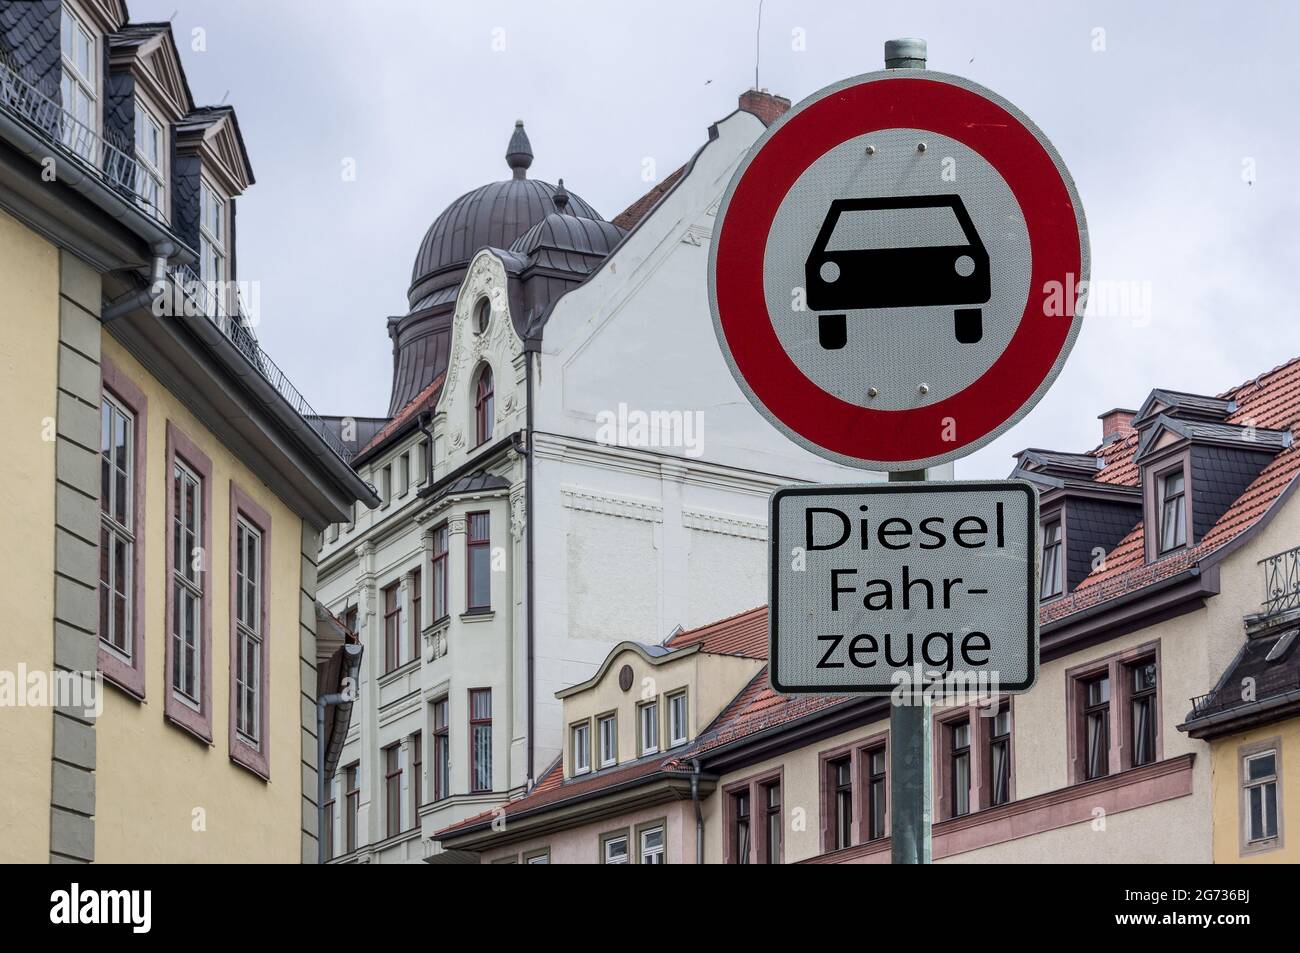 Driving ban for diesel vehicles in the city Stock Photo